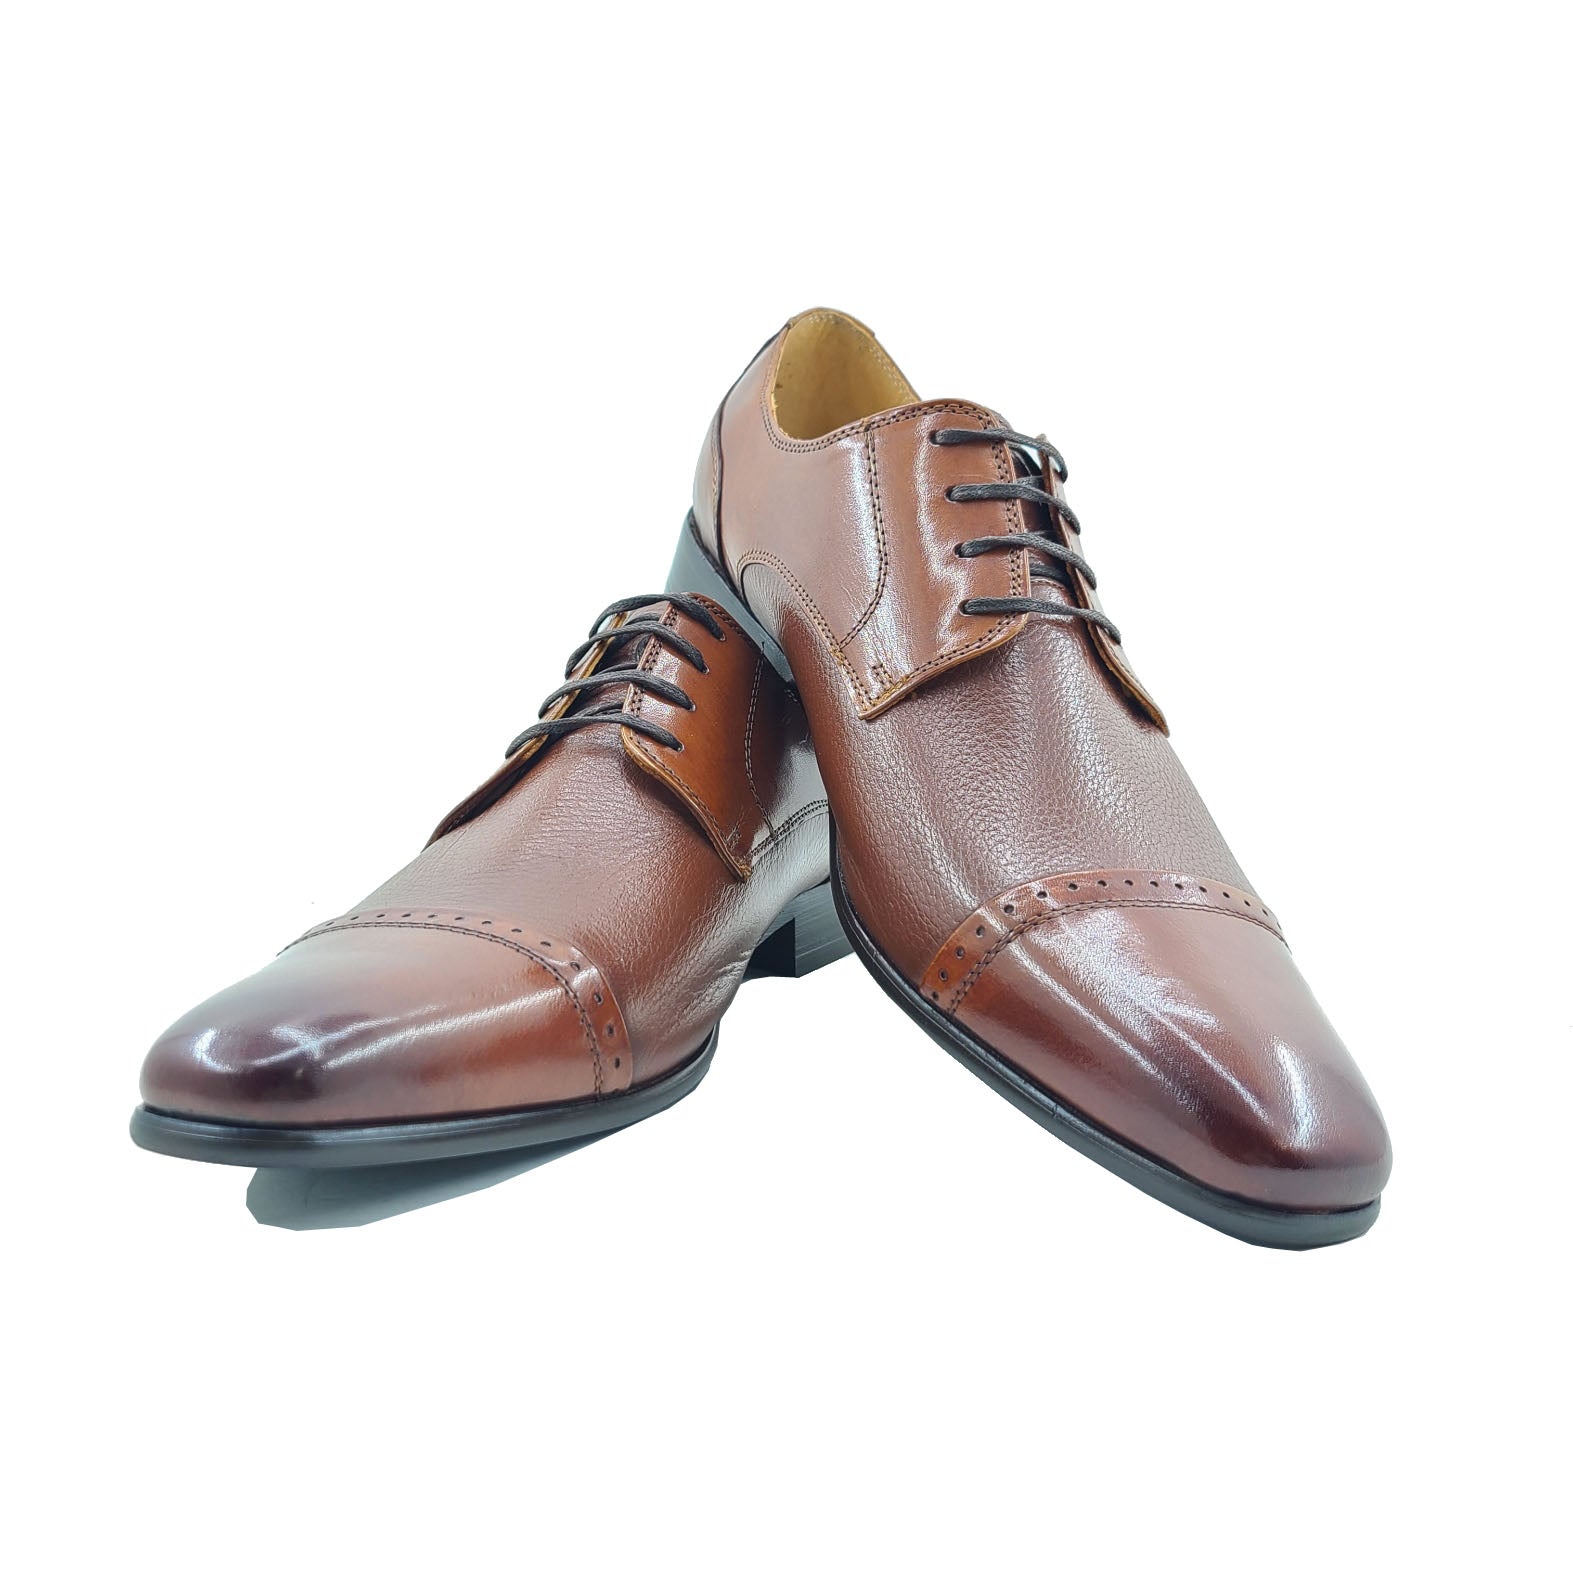 Carrucci Textured Leather Oxford